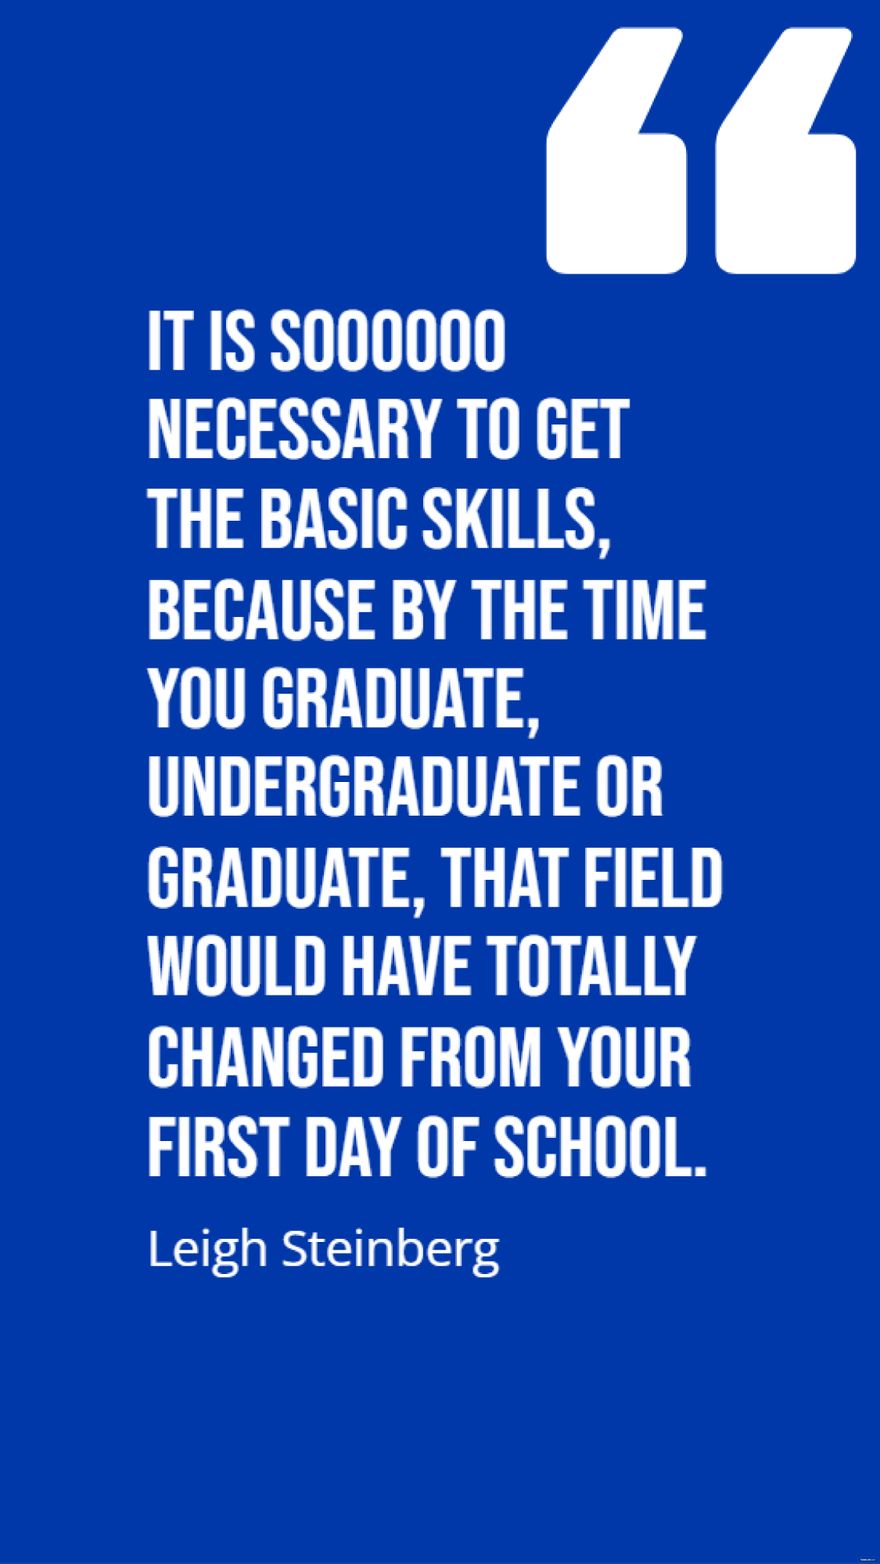 Leigh Steinberg - It is soooooo necessary to get the basic skills, because by the time you graduate, undergraduate or graduate, that field would have totally changed from your first day of school.